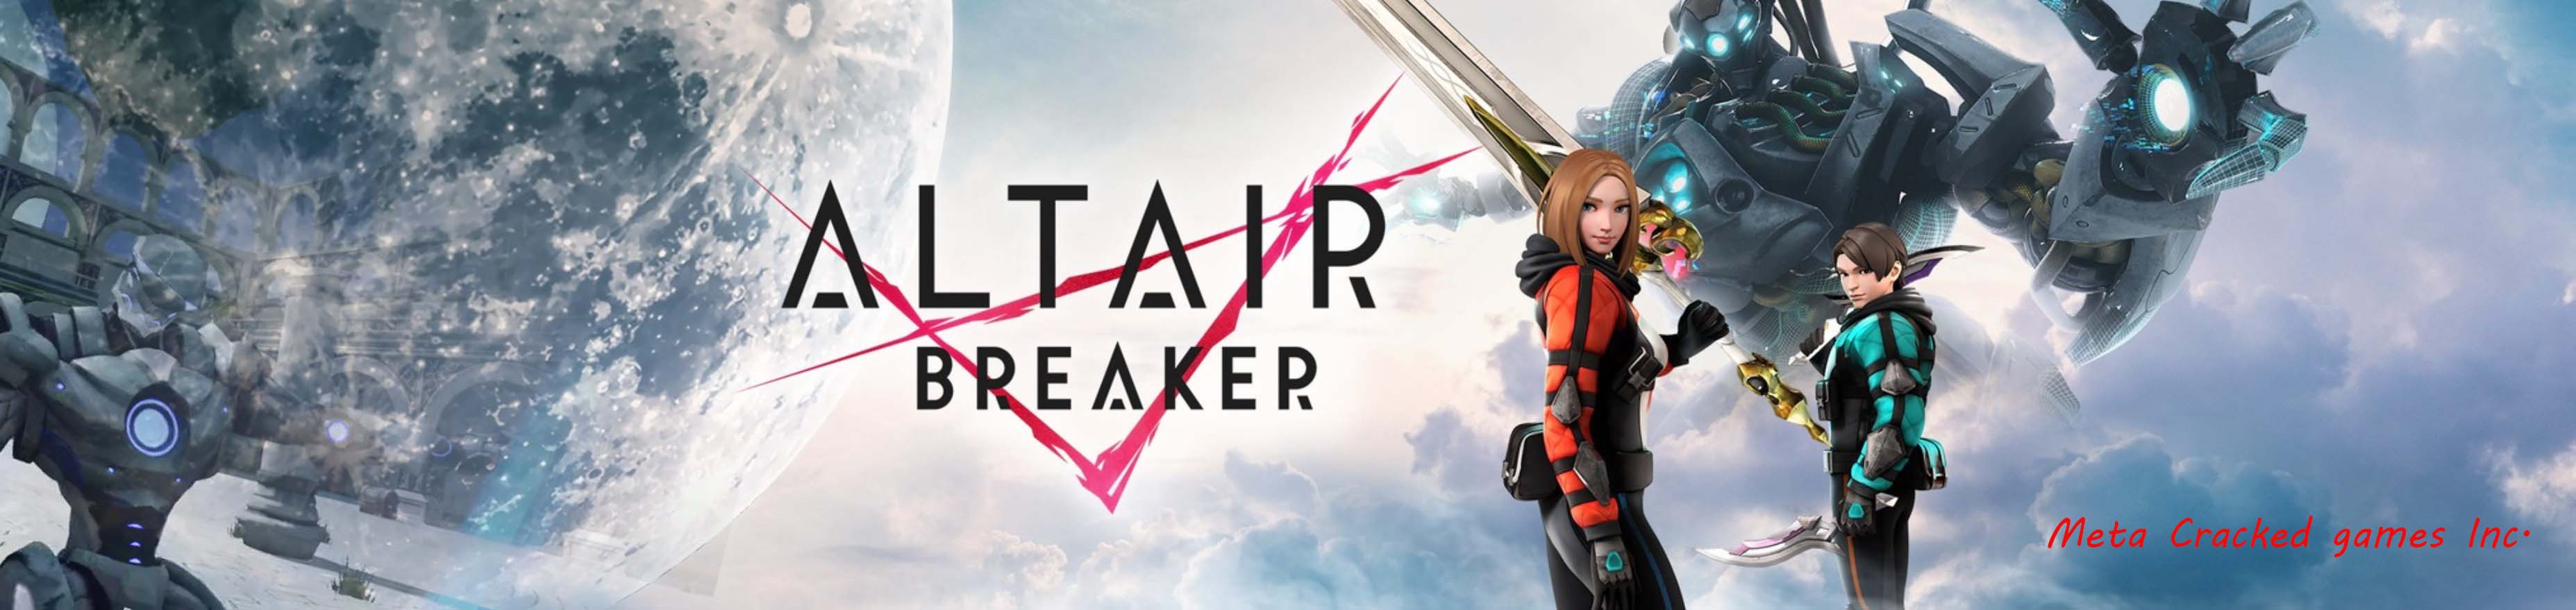 Altair Breaker, oculus (meta) quest 1  2, the pirate cracked game free download